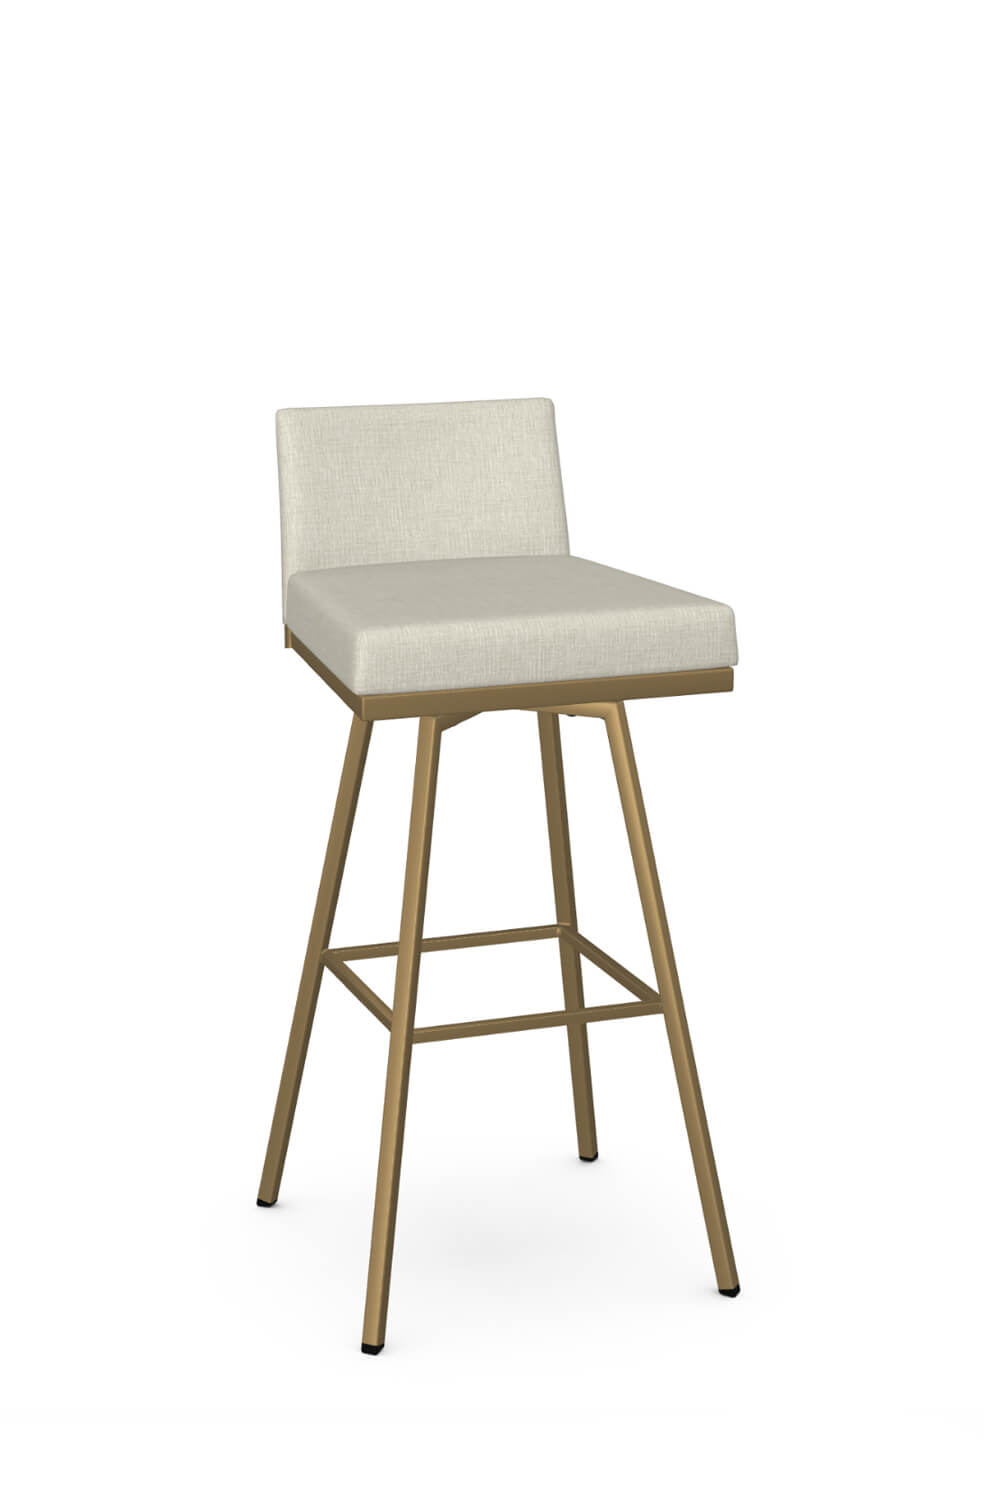 https://barstoolcomforts.com/wp-content/uploads/2021/04/amisco-linea-modern-upholstered-gold-bar-stool-with-low-back.jpg